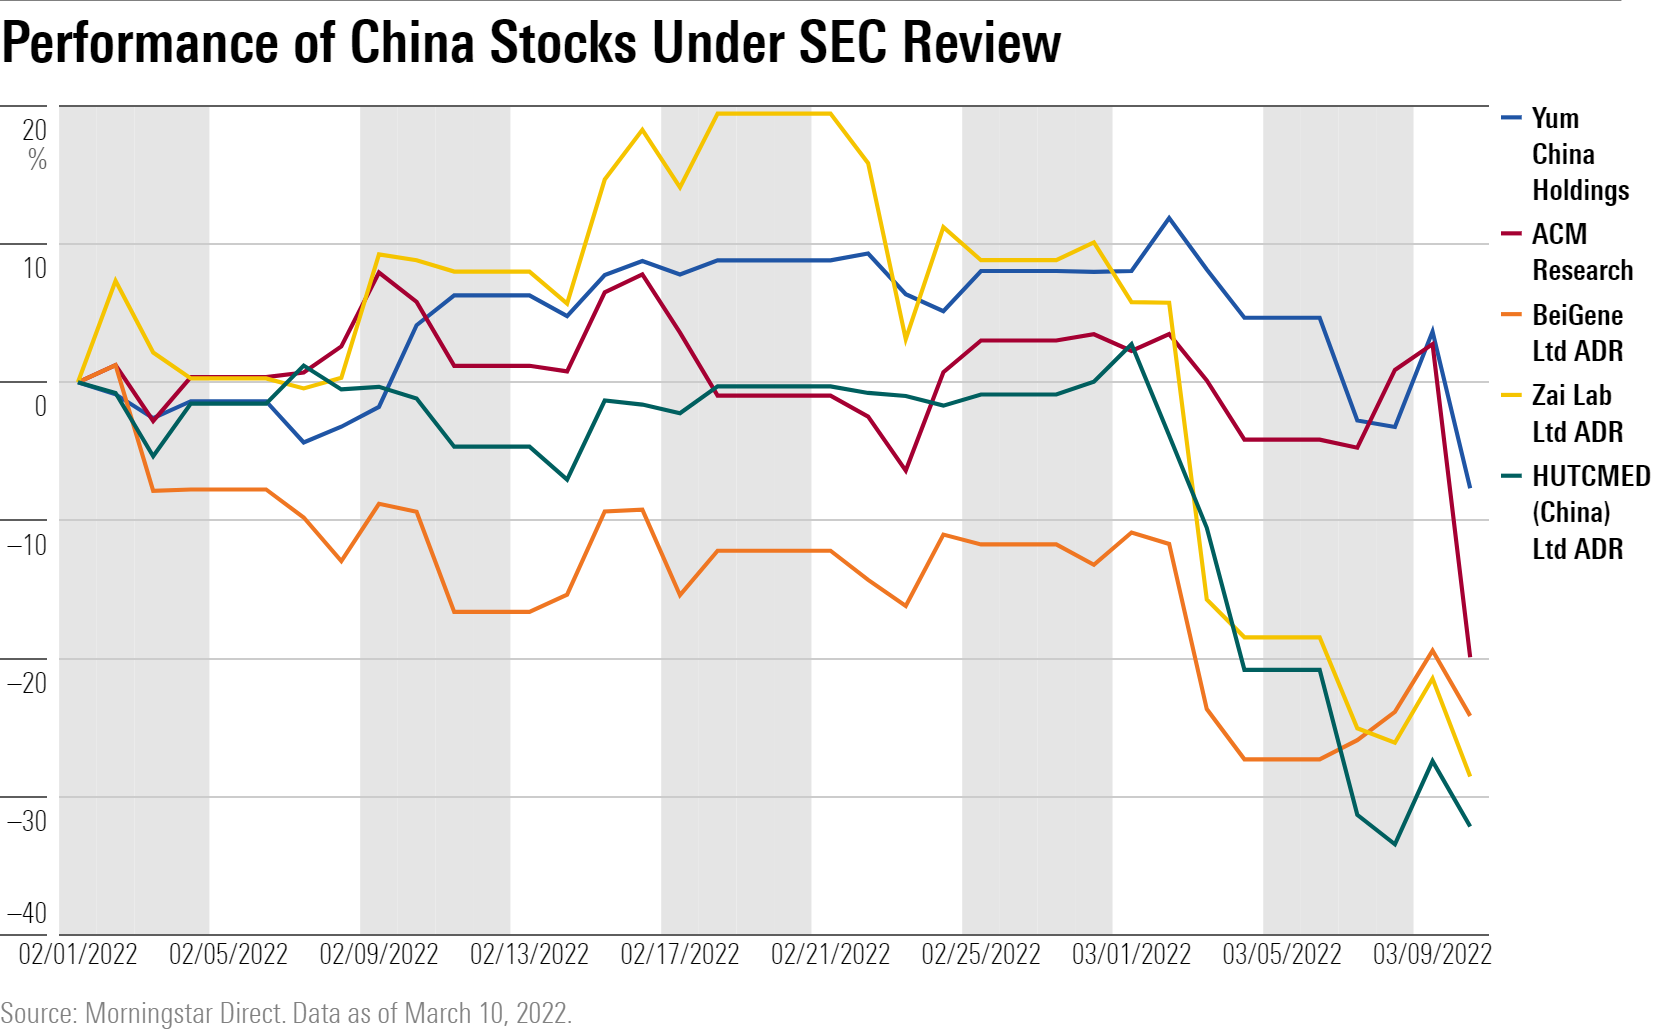 Are Delistings of Chinese Stocks on Their Way? Morningstar